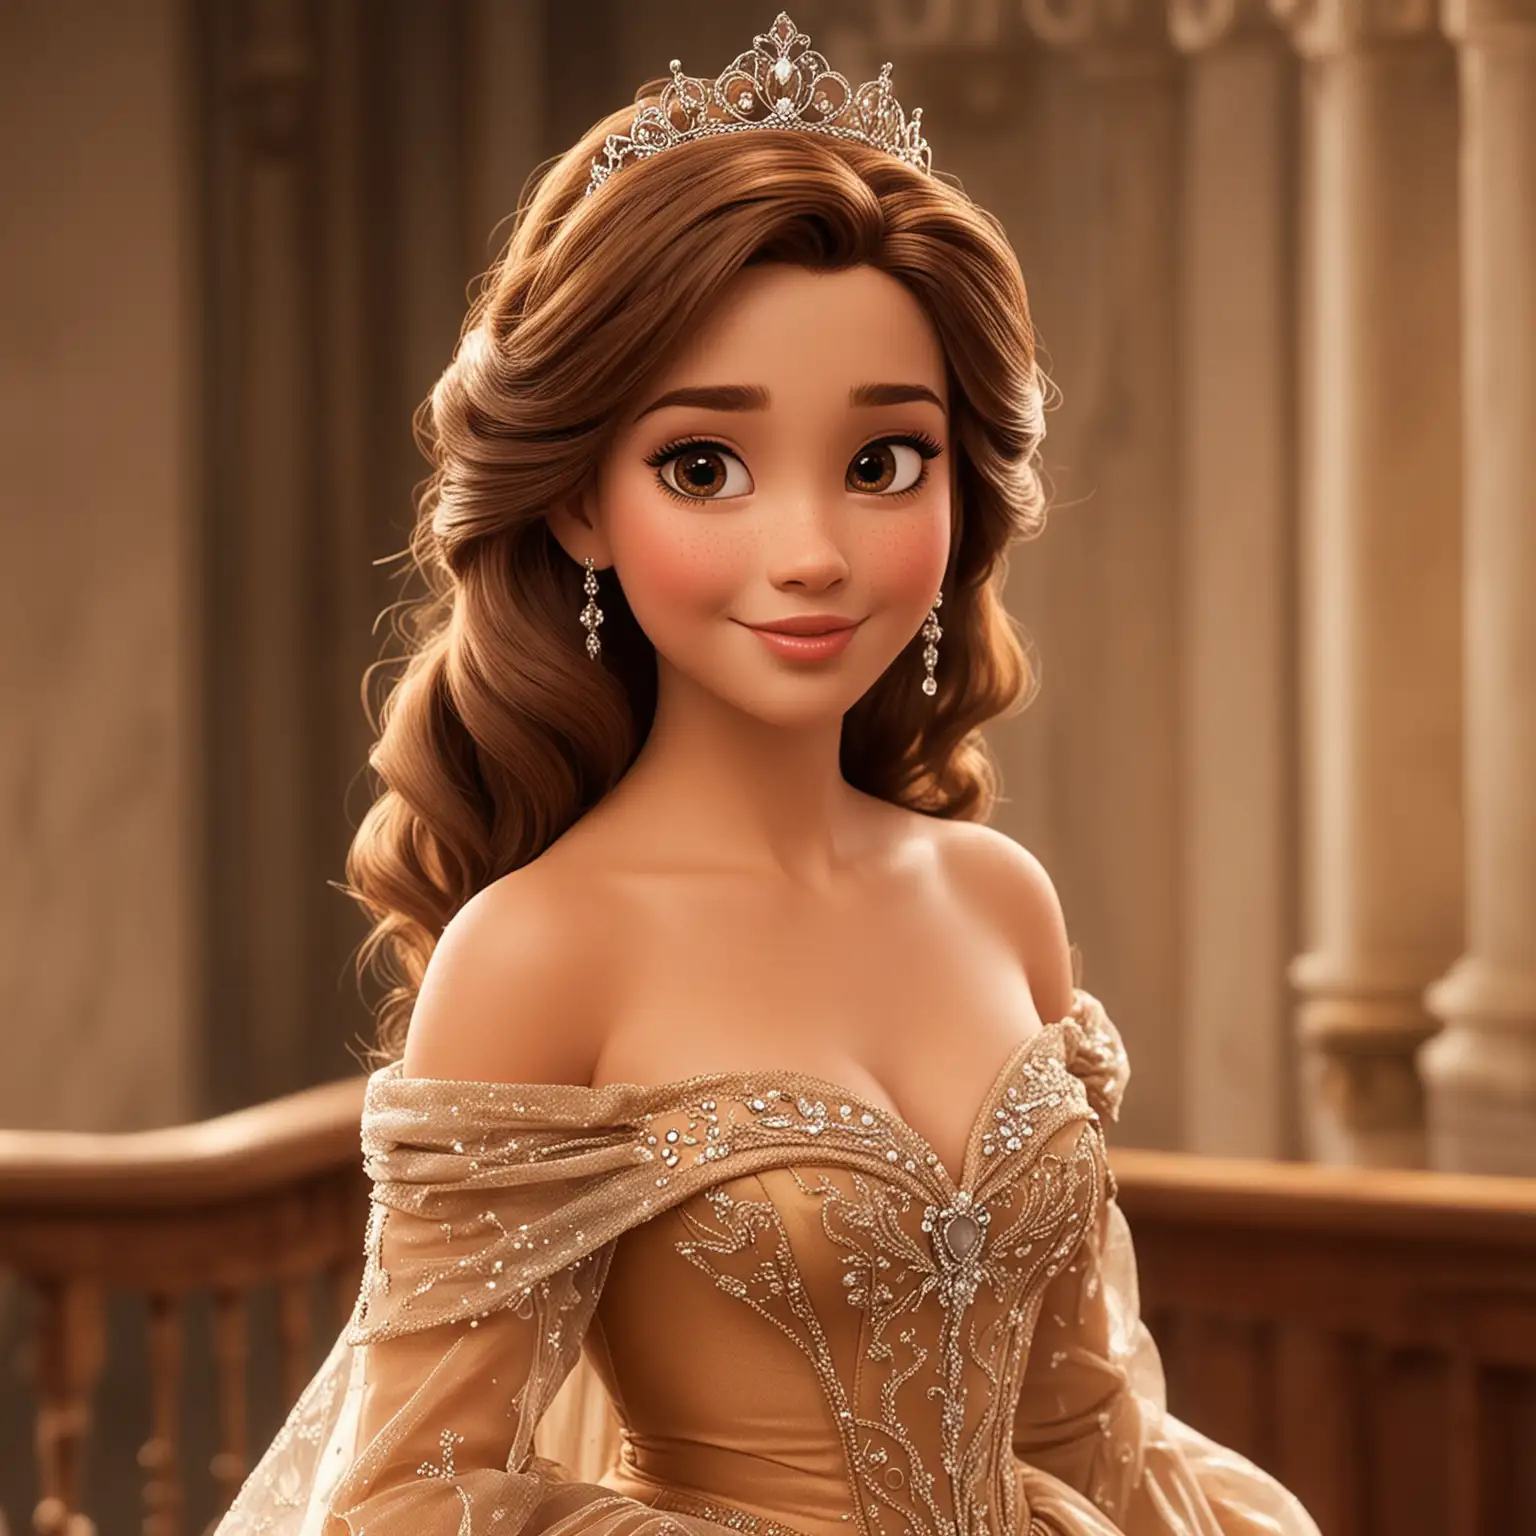 Princess-Disney-in-Brown-Gown-with-CoffeeColored-Eyes